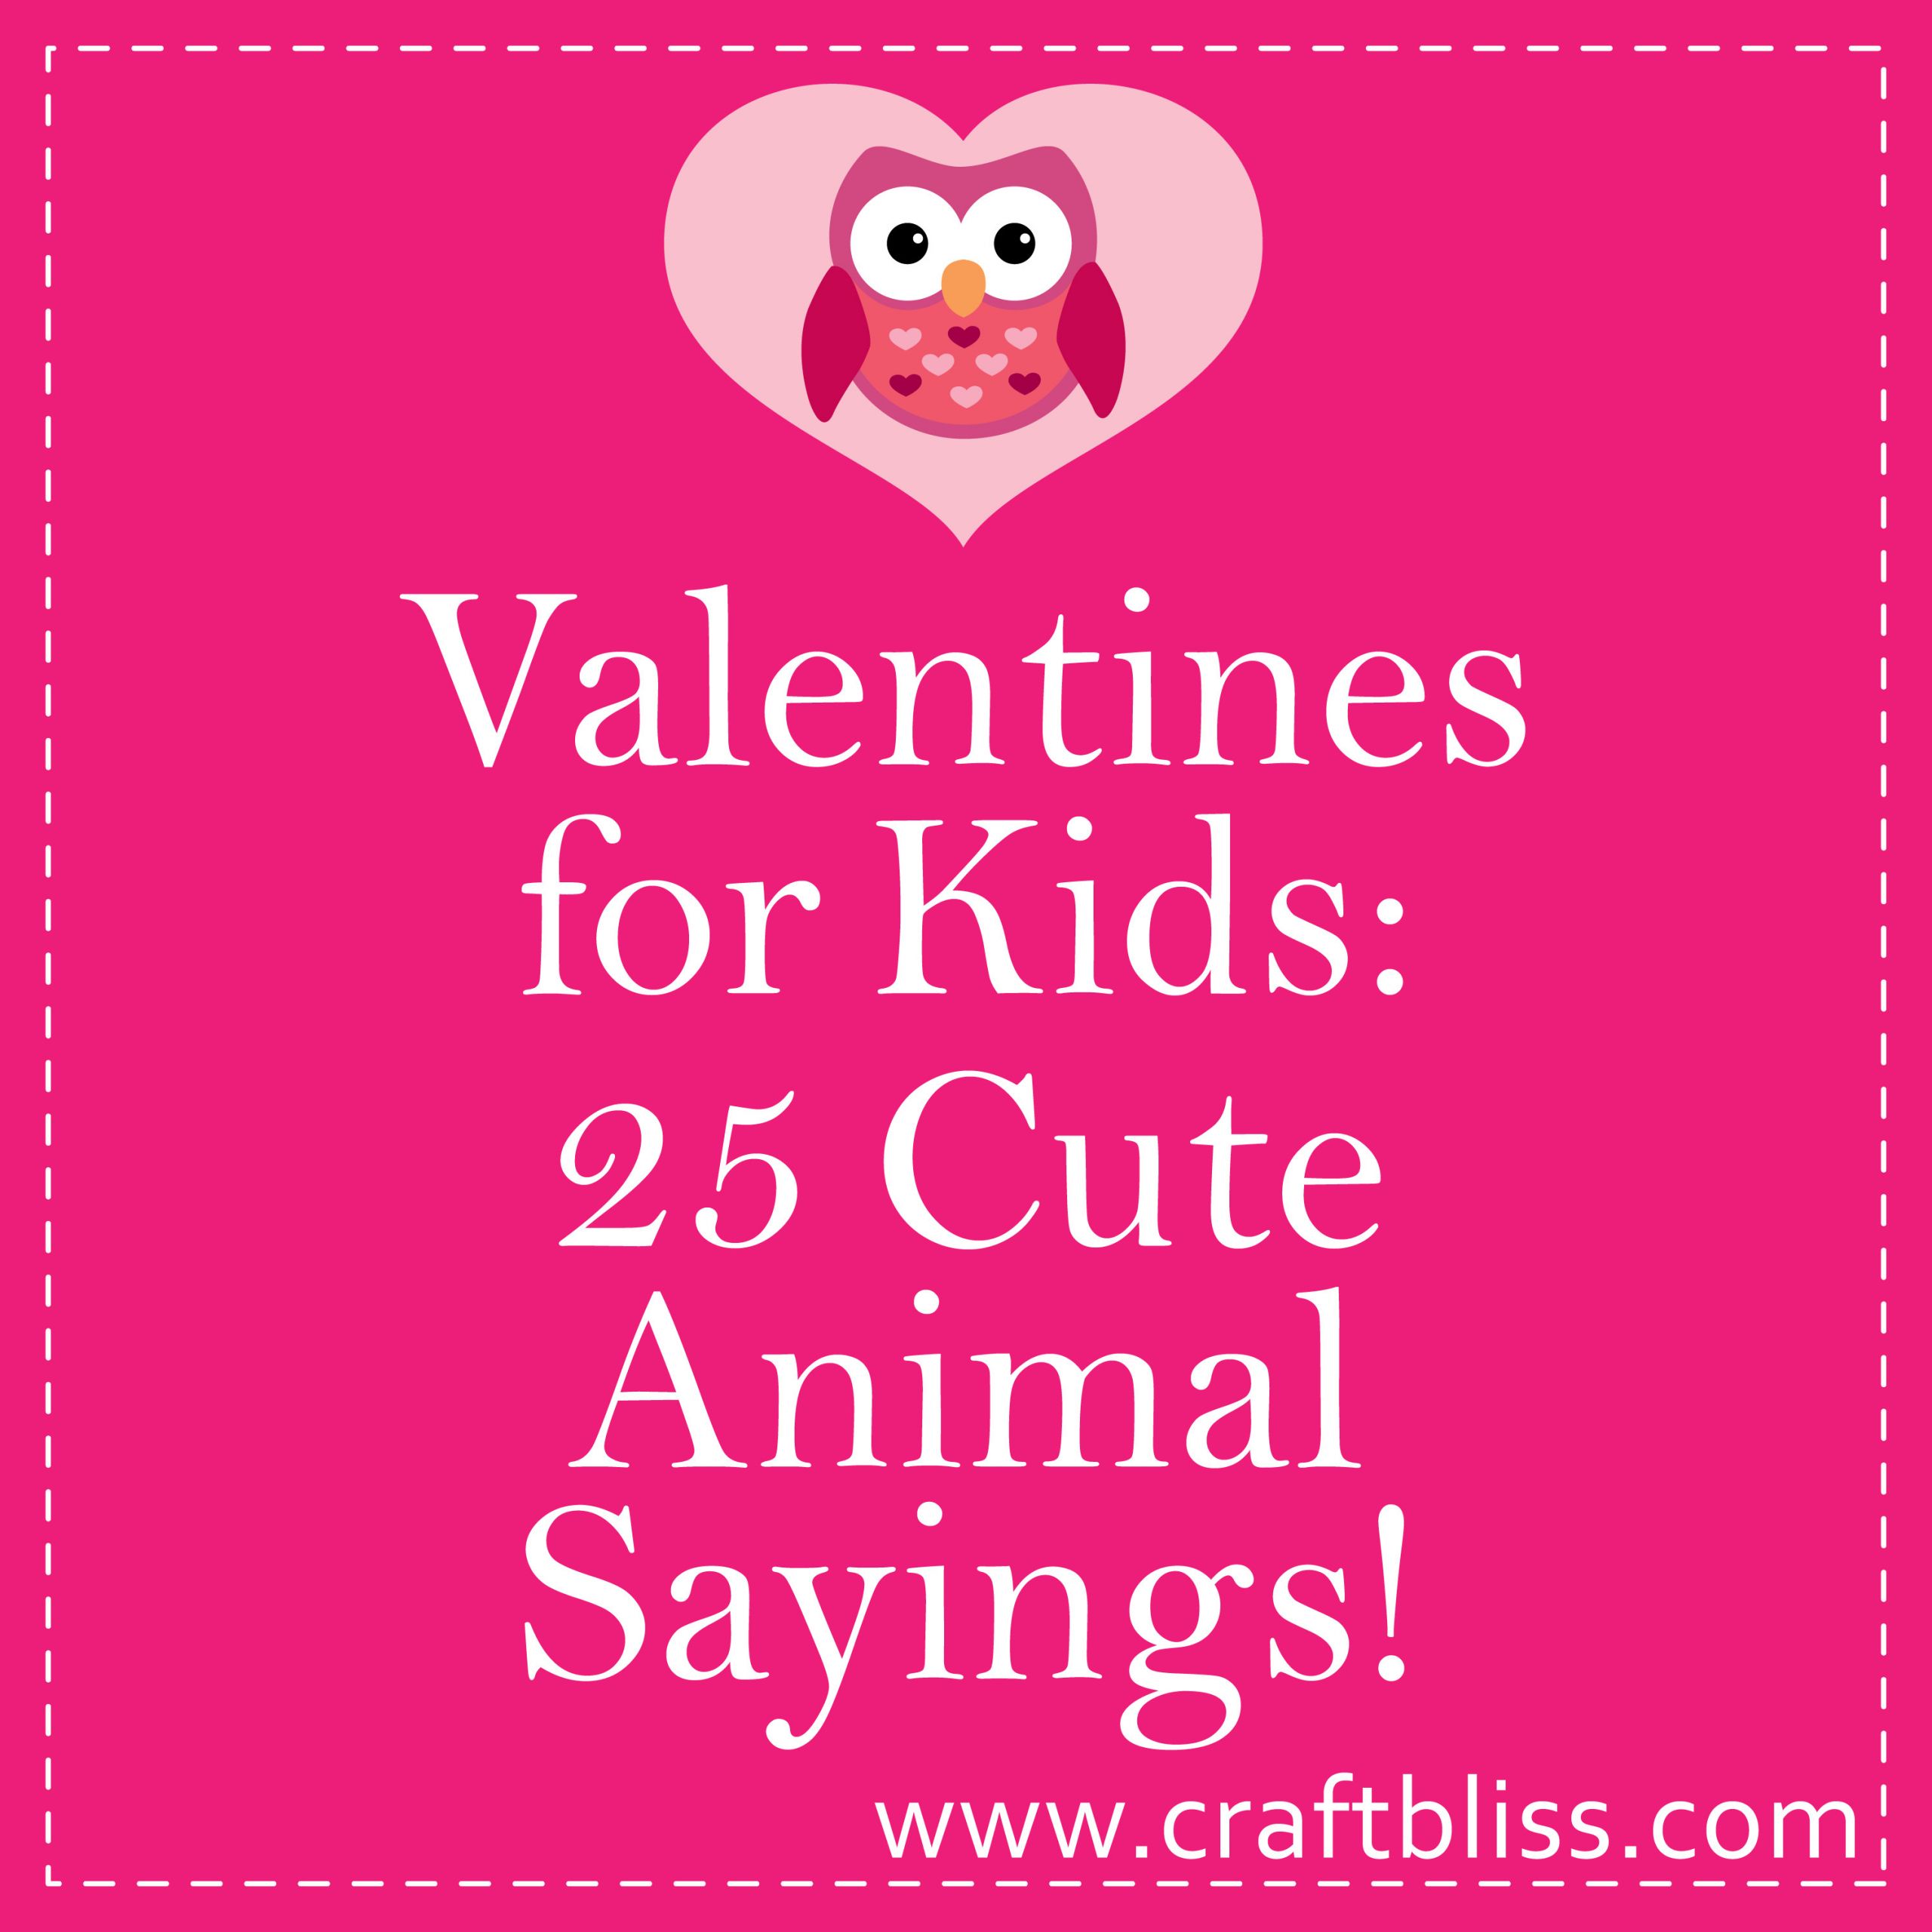 Valentine Day Quotes For Kids
 Sayings Valentines For Kids Christmas Card Cute Animal